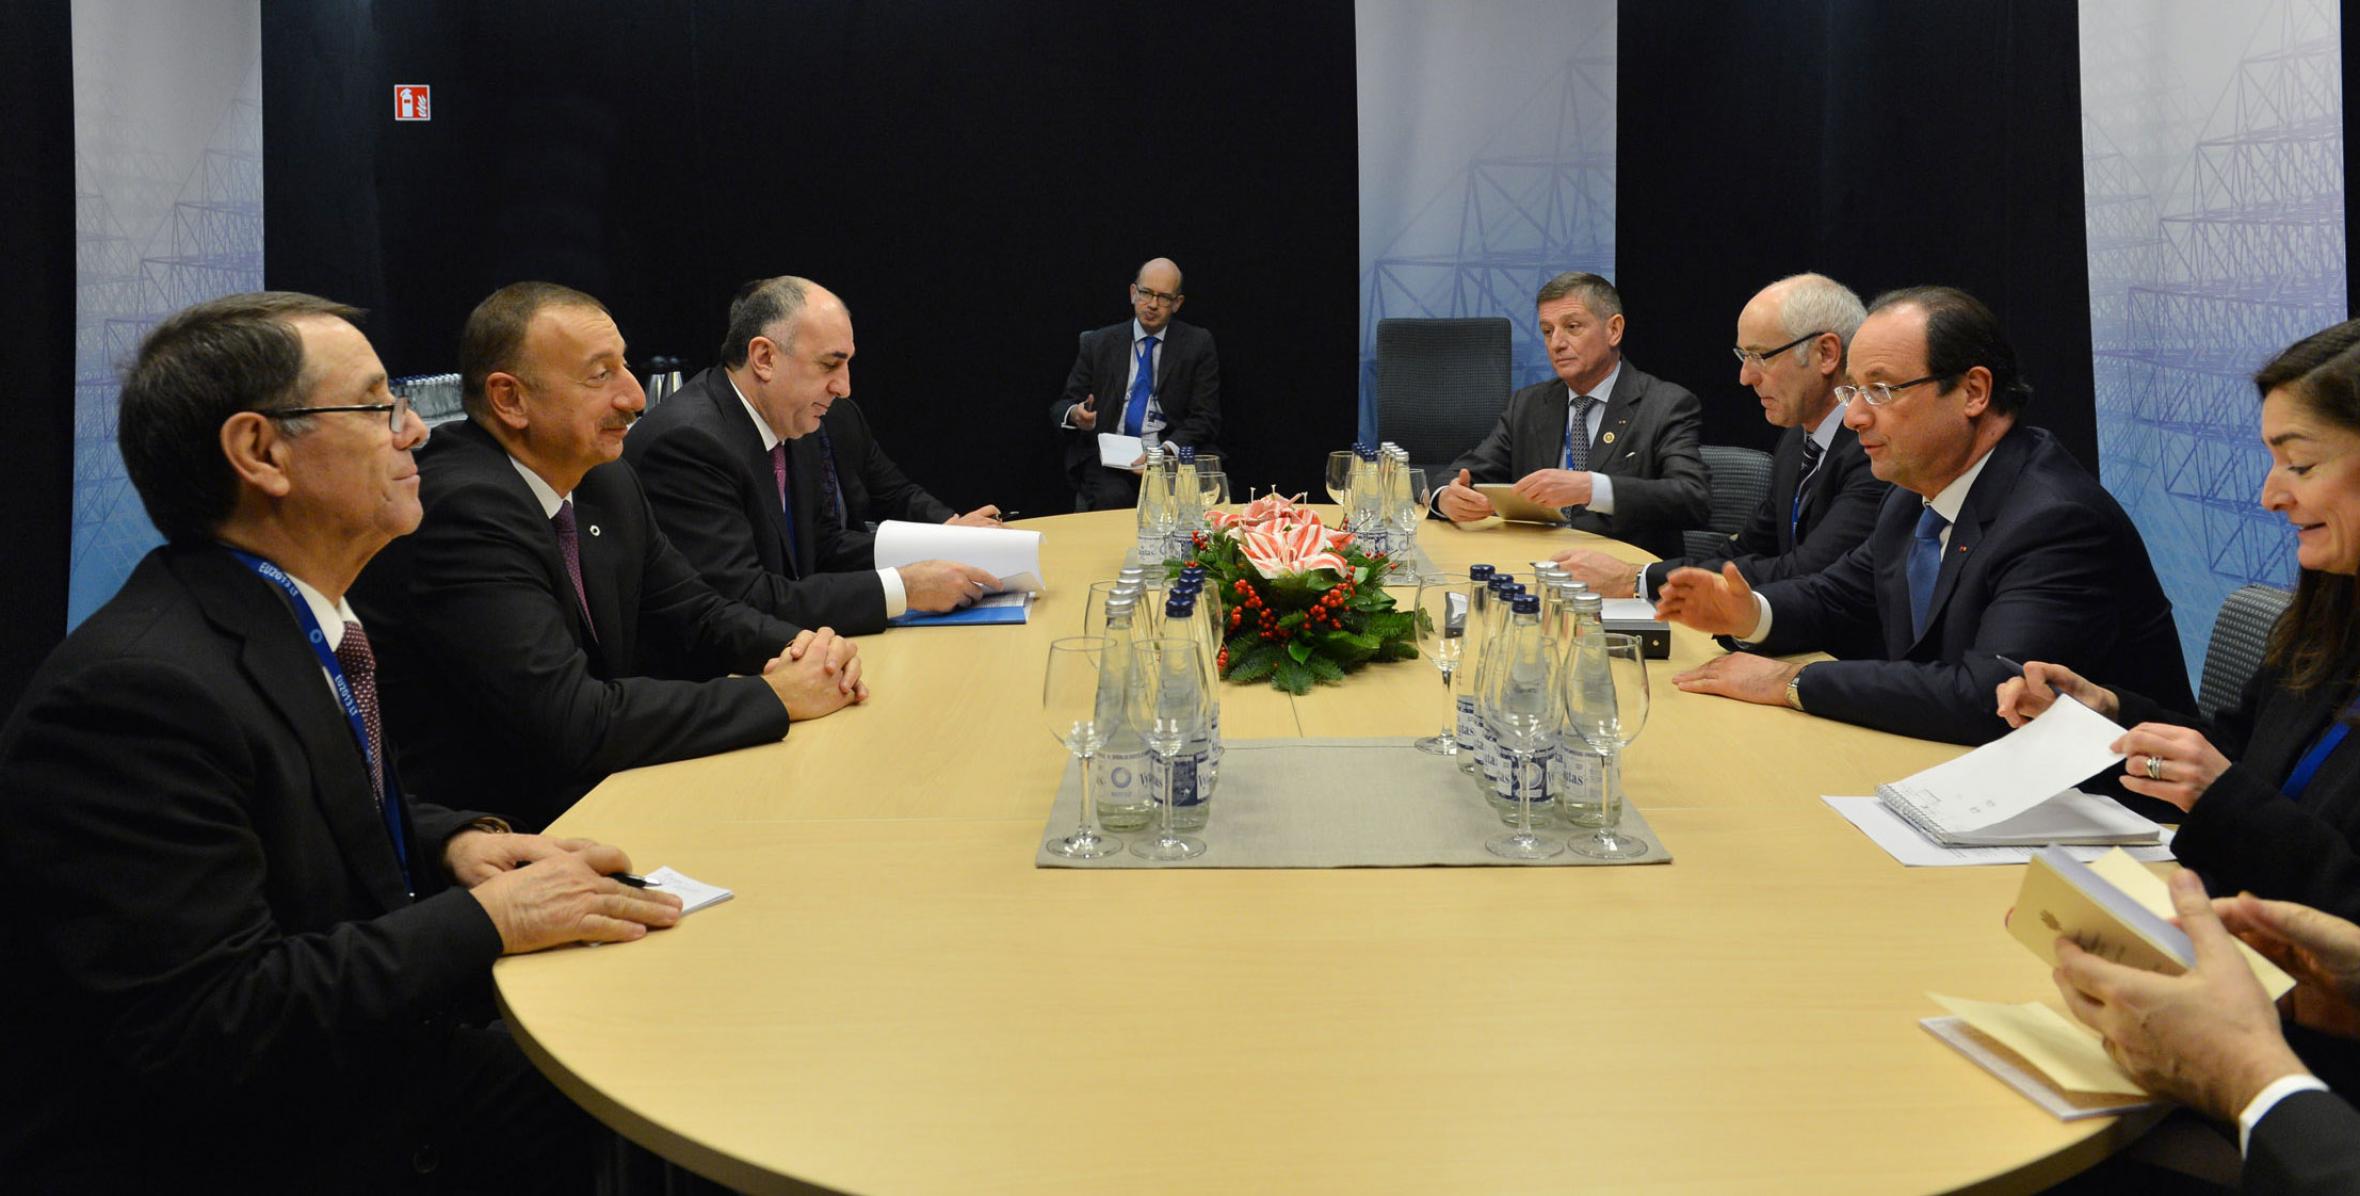 Ilham Aliyev had a meeting with President of the French Republic Francois Hollande